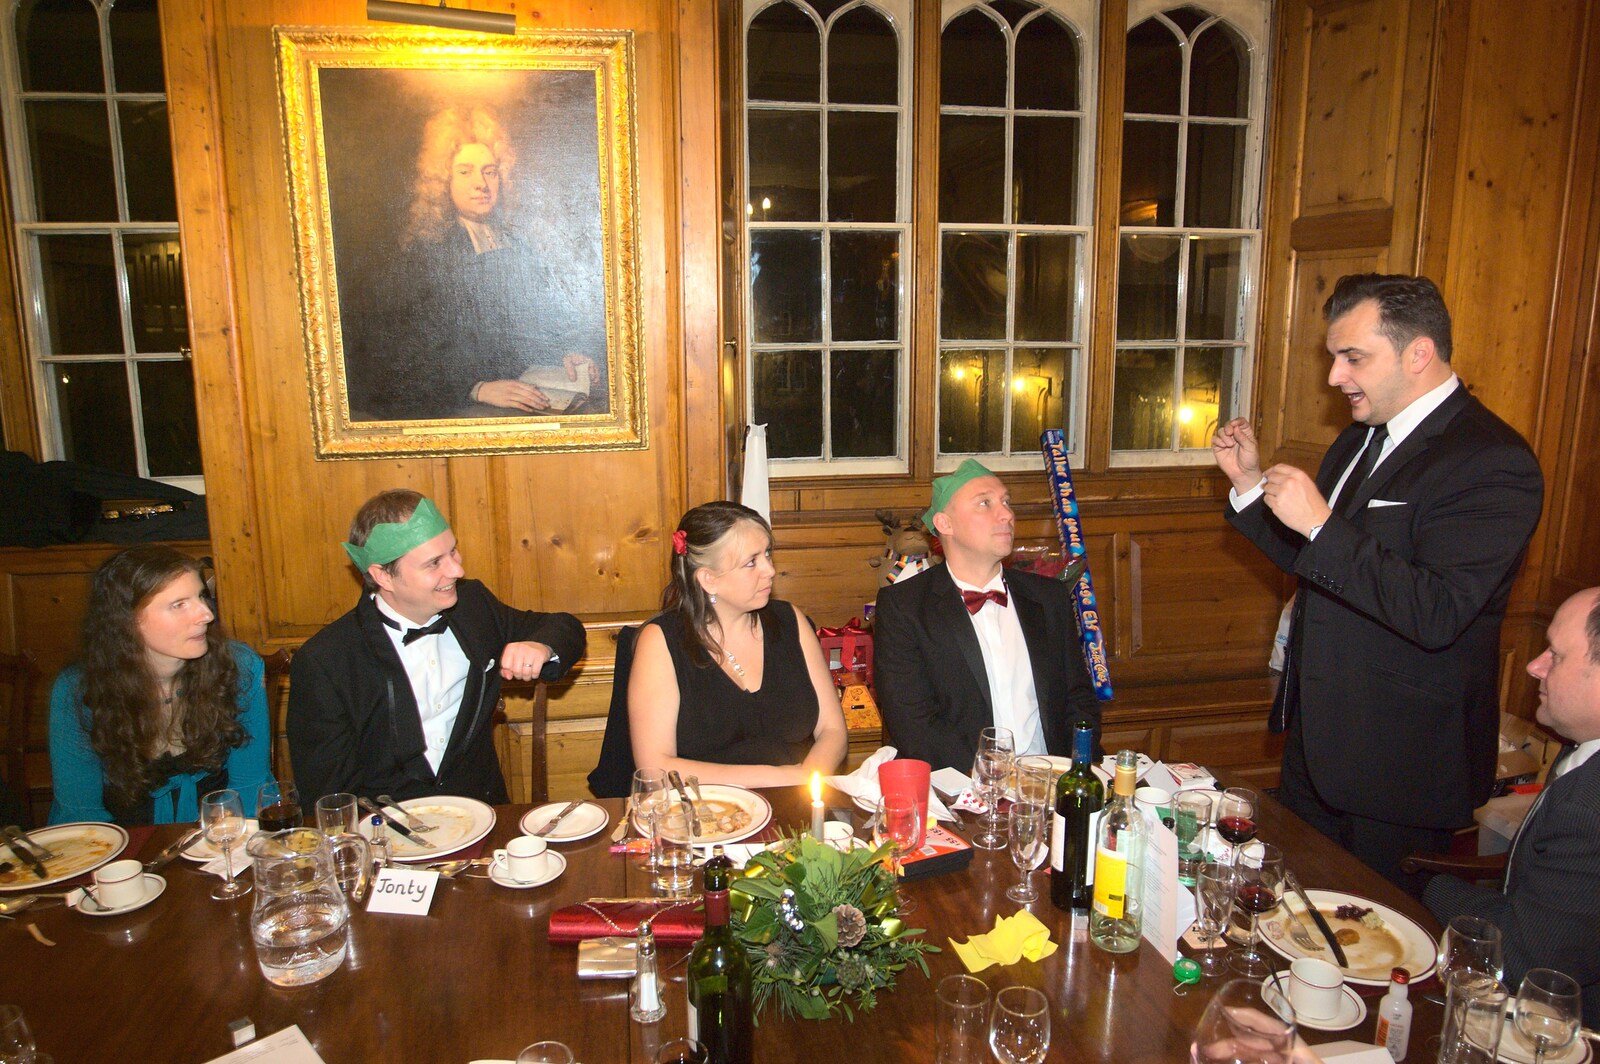 More magic from A Qualcomm Christmas, Christ's College, Cambridge - 8th December 2011